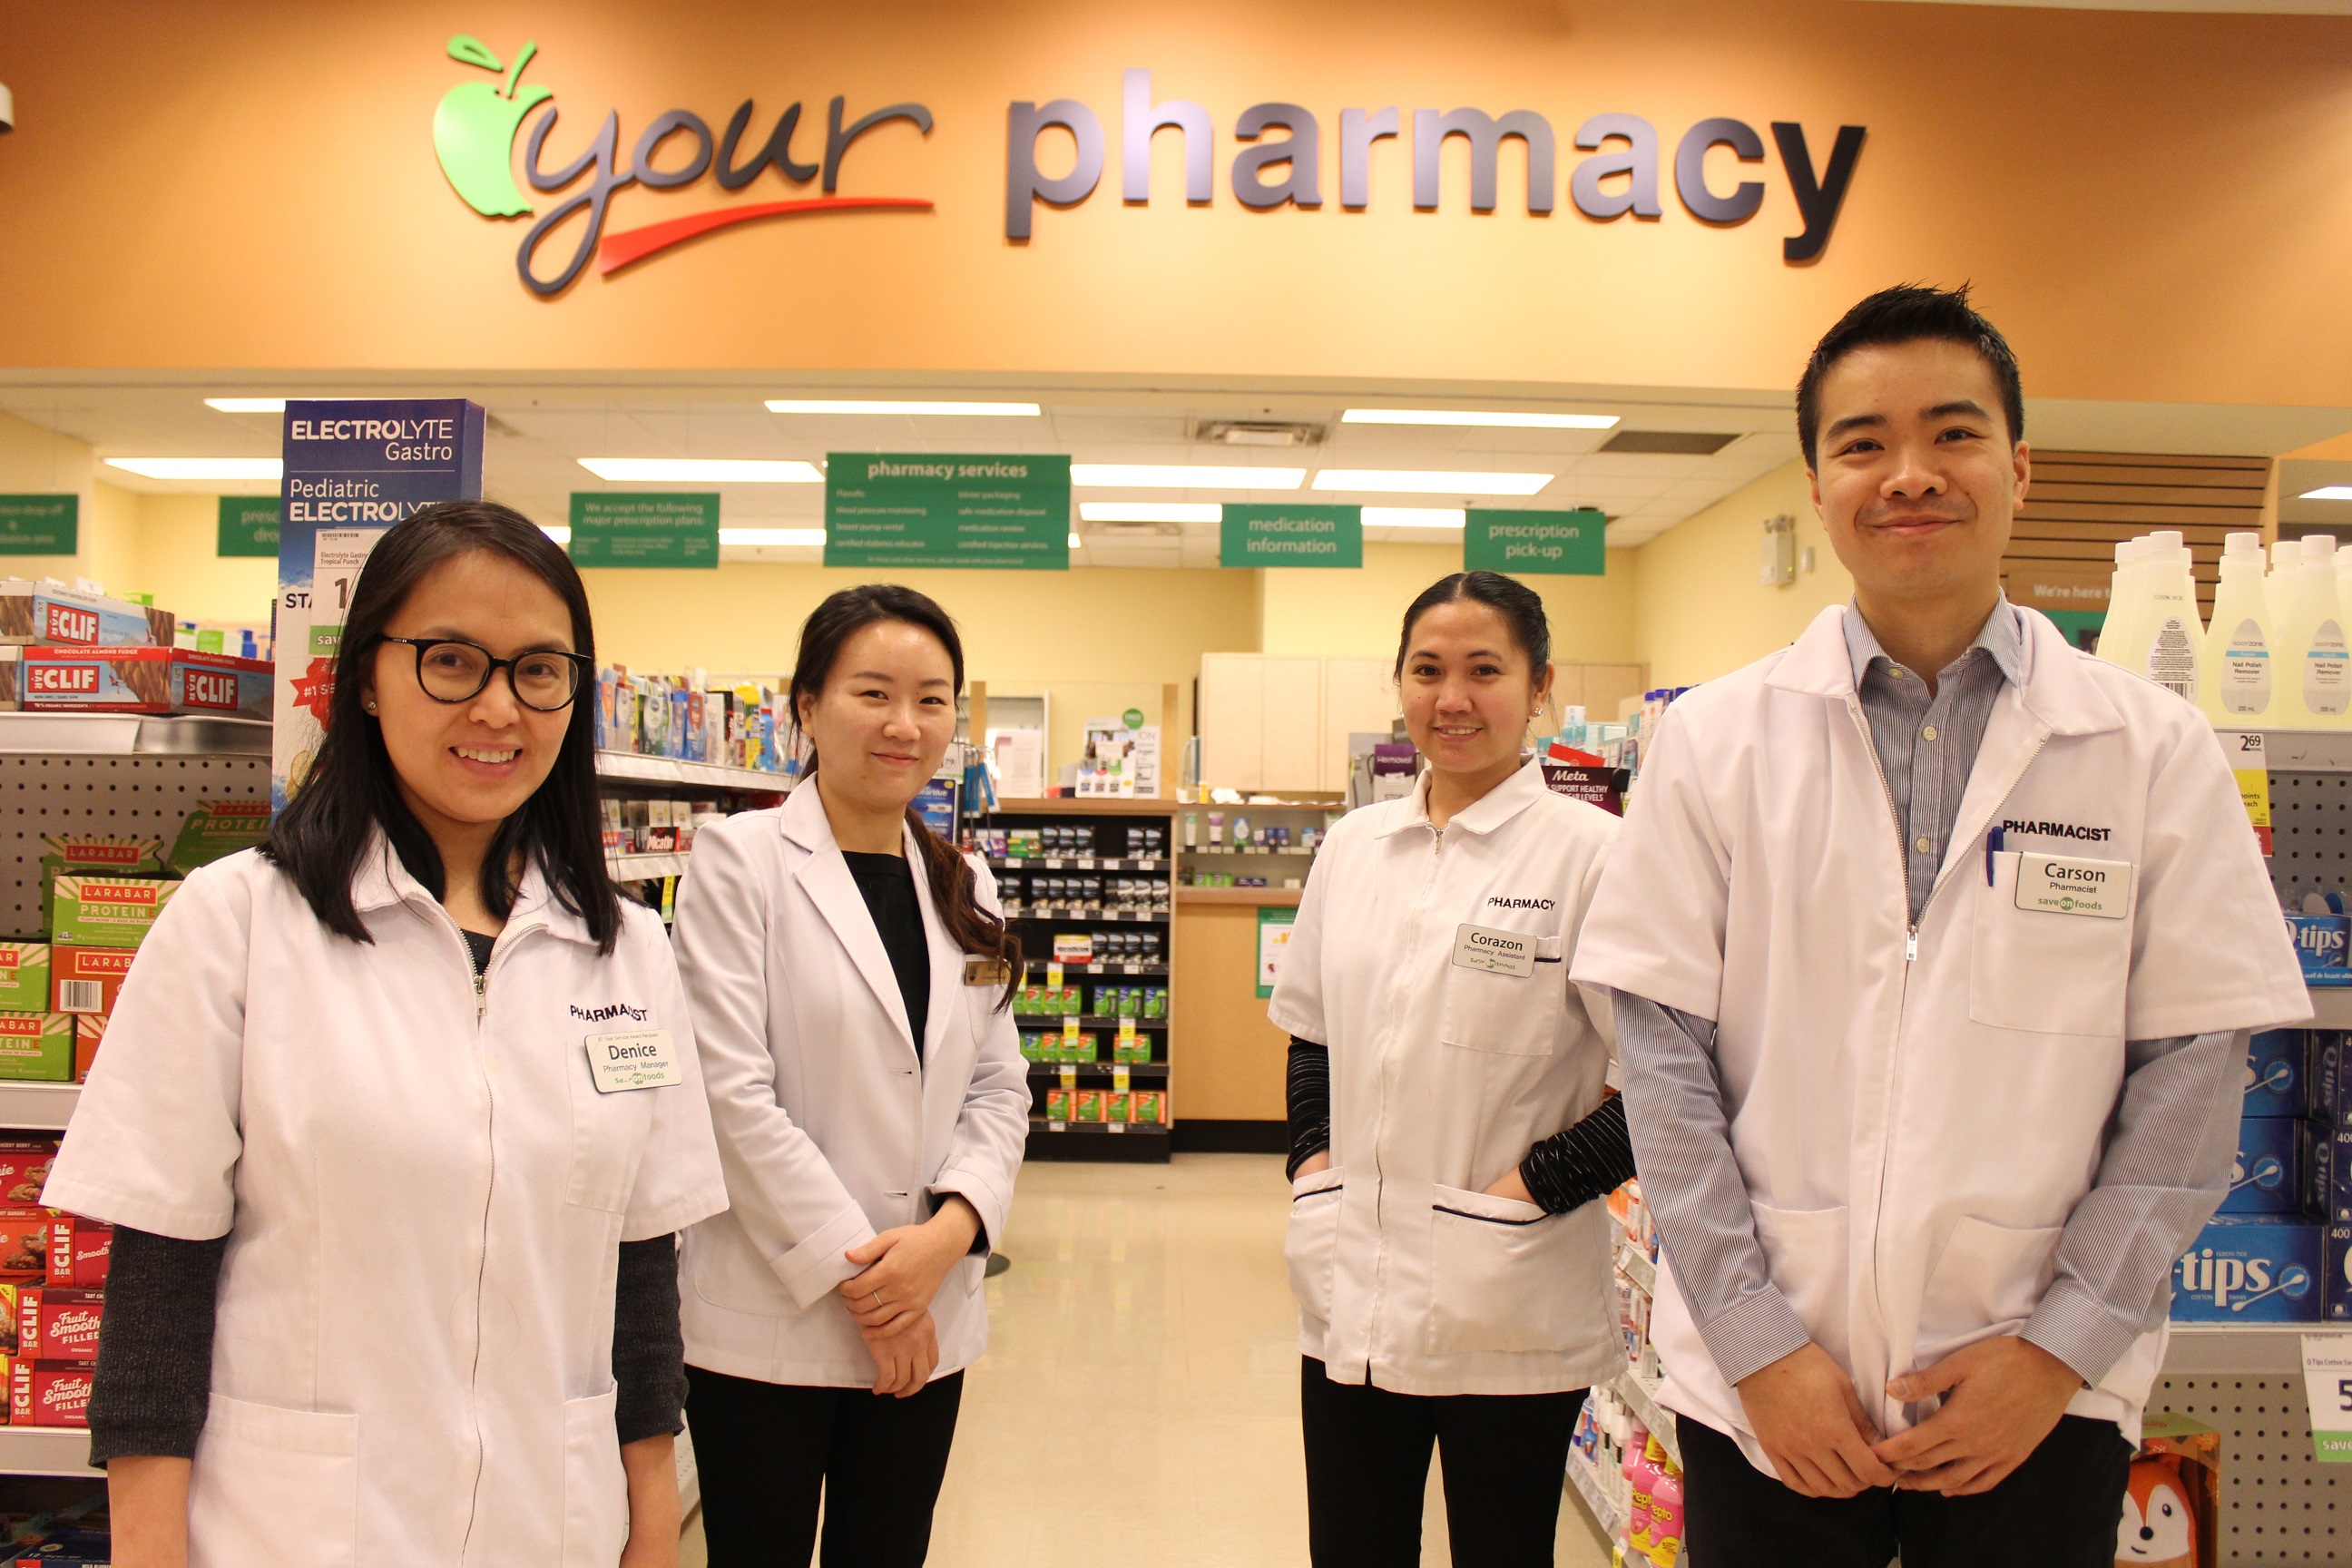 From left to right, pharmacy team members Denice, Eun Jin, Cora, Carson